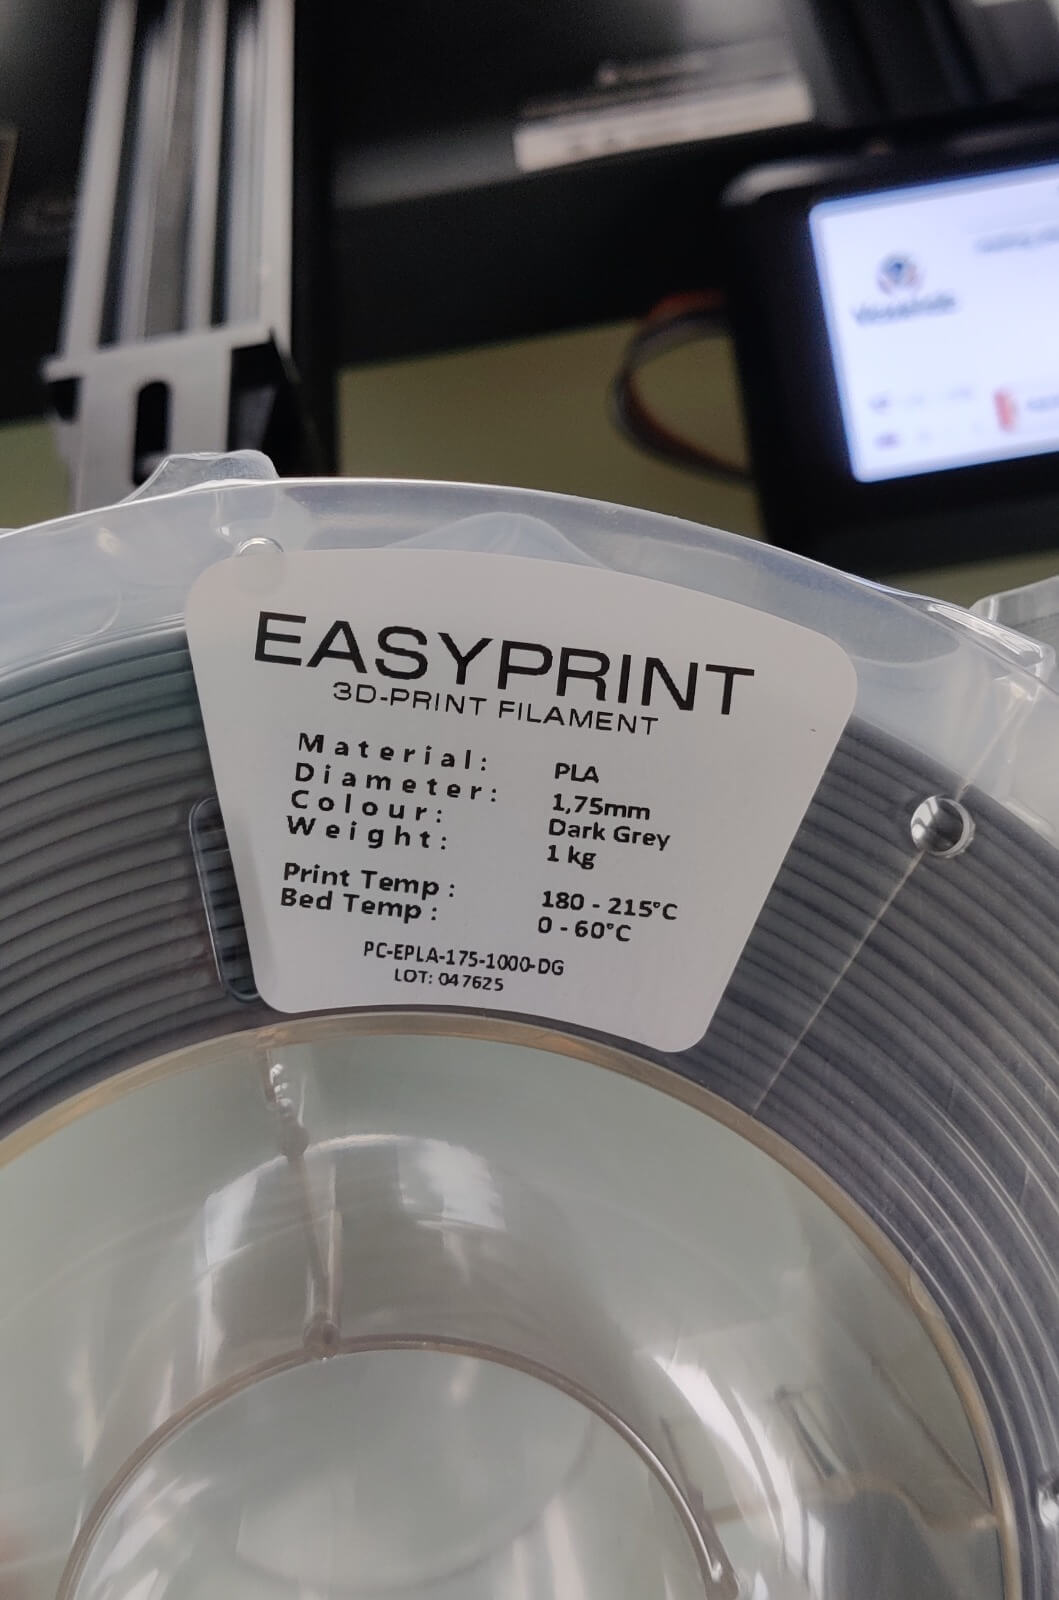 Filament's technical information